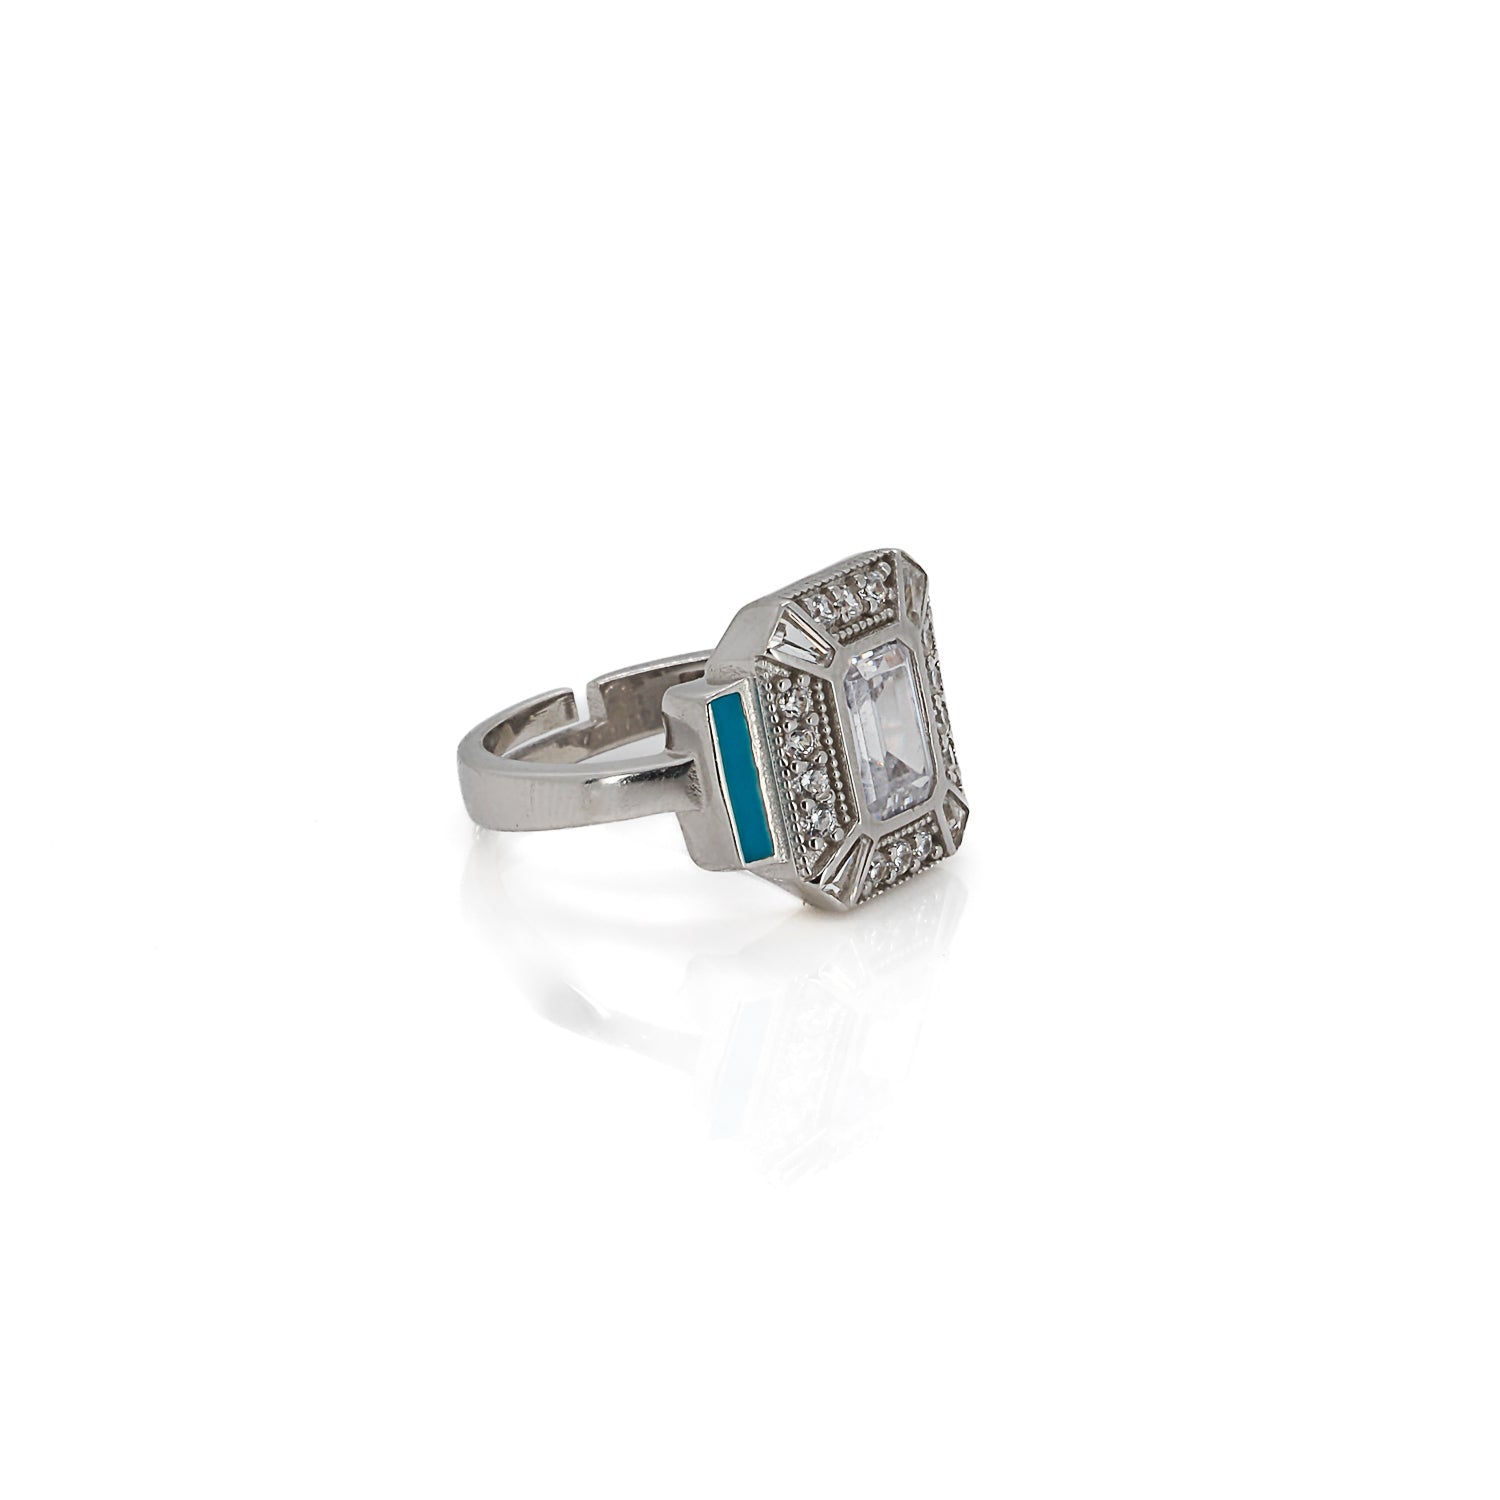 Sterling Silver Band with Cz Diamonds - Vibrant and Refined